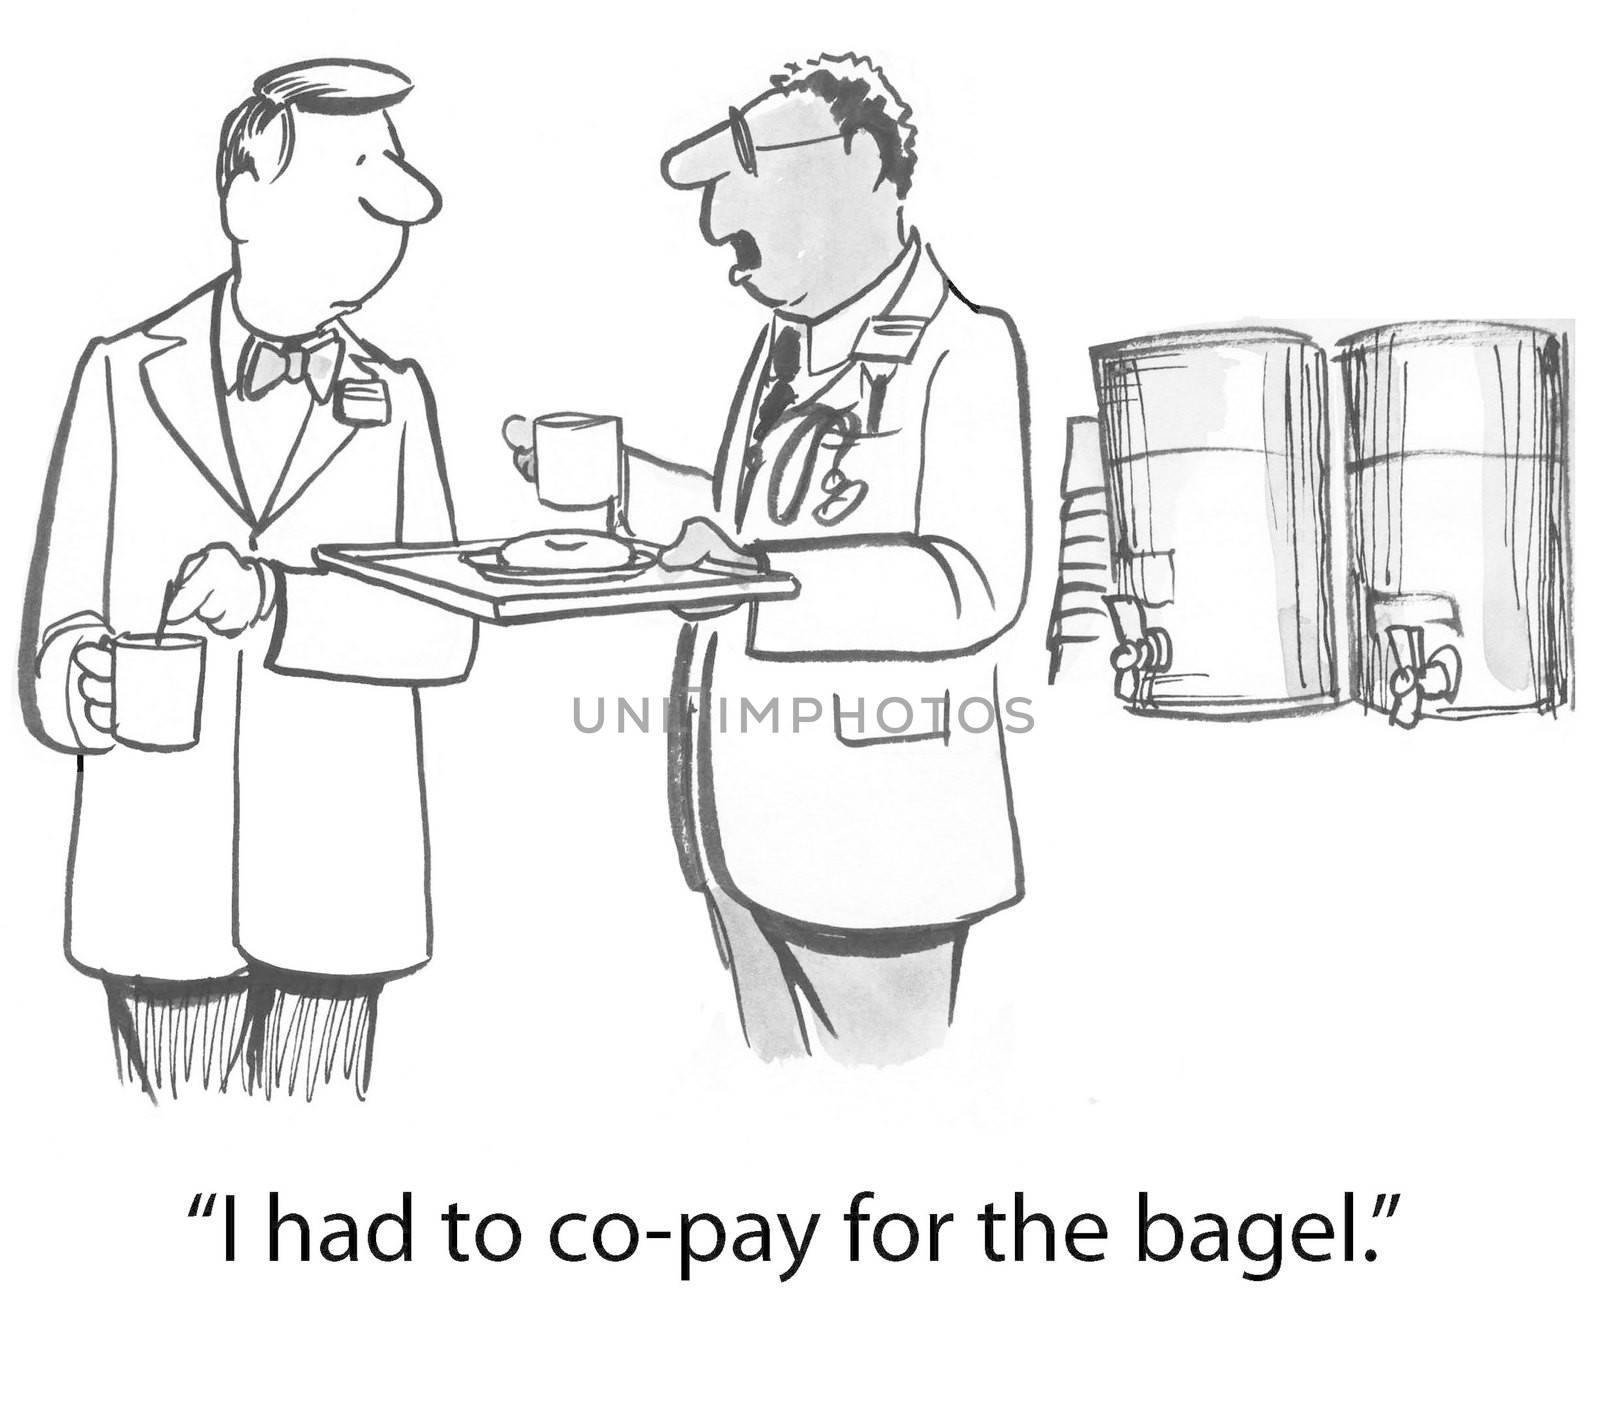 "I had to co-pay for the bagel."